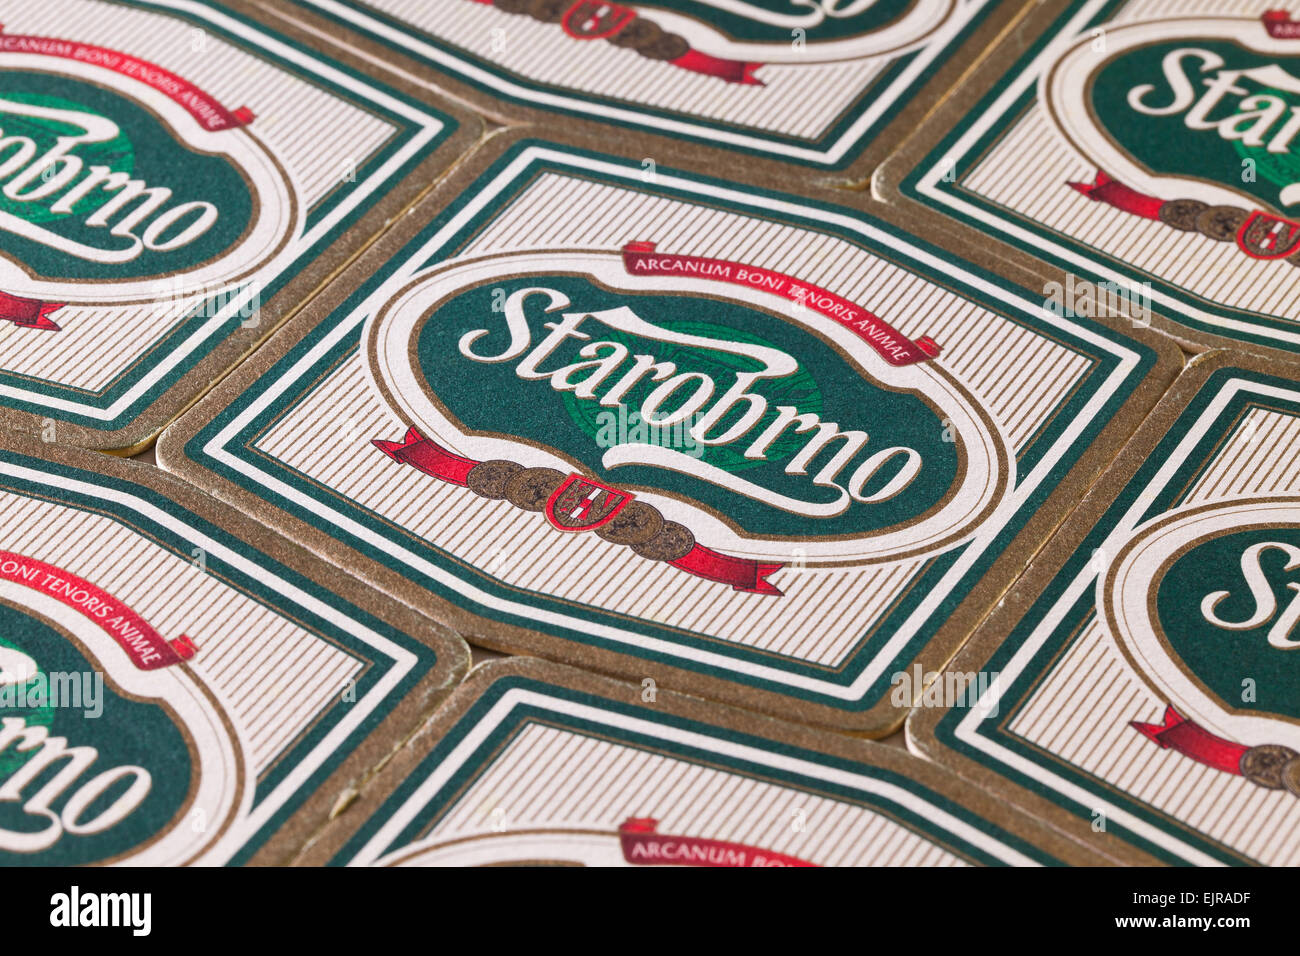 Prague,Czech Republic-December 3,2014:Beermats from Starobrno beer.Starobrno Brewery is a Czech brewery located in Brno Stock Photo